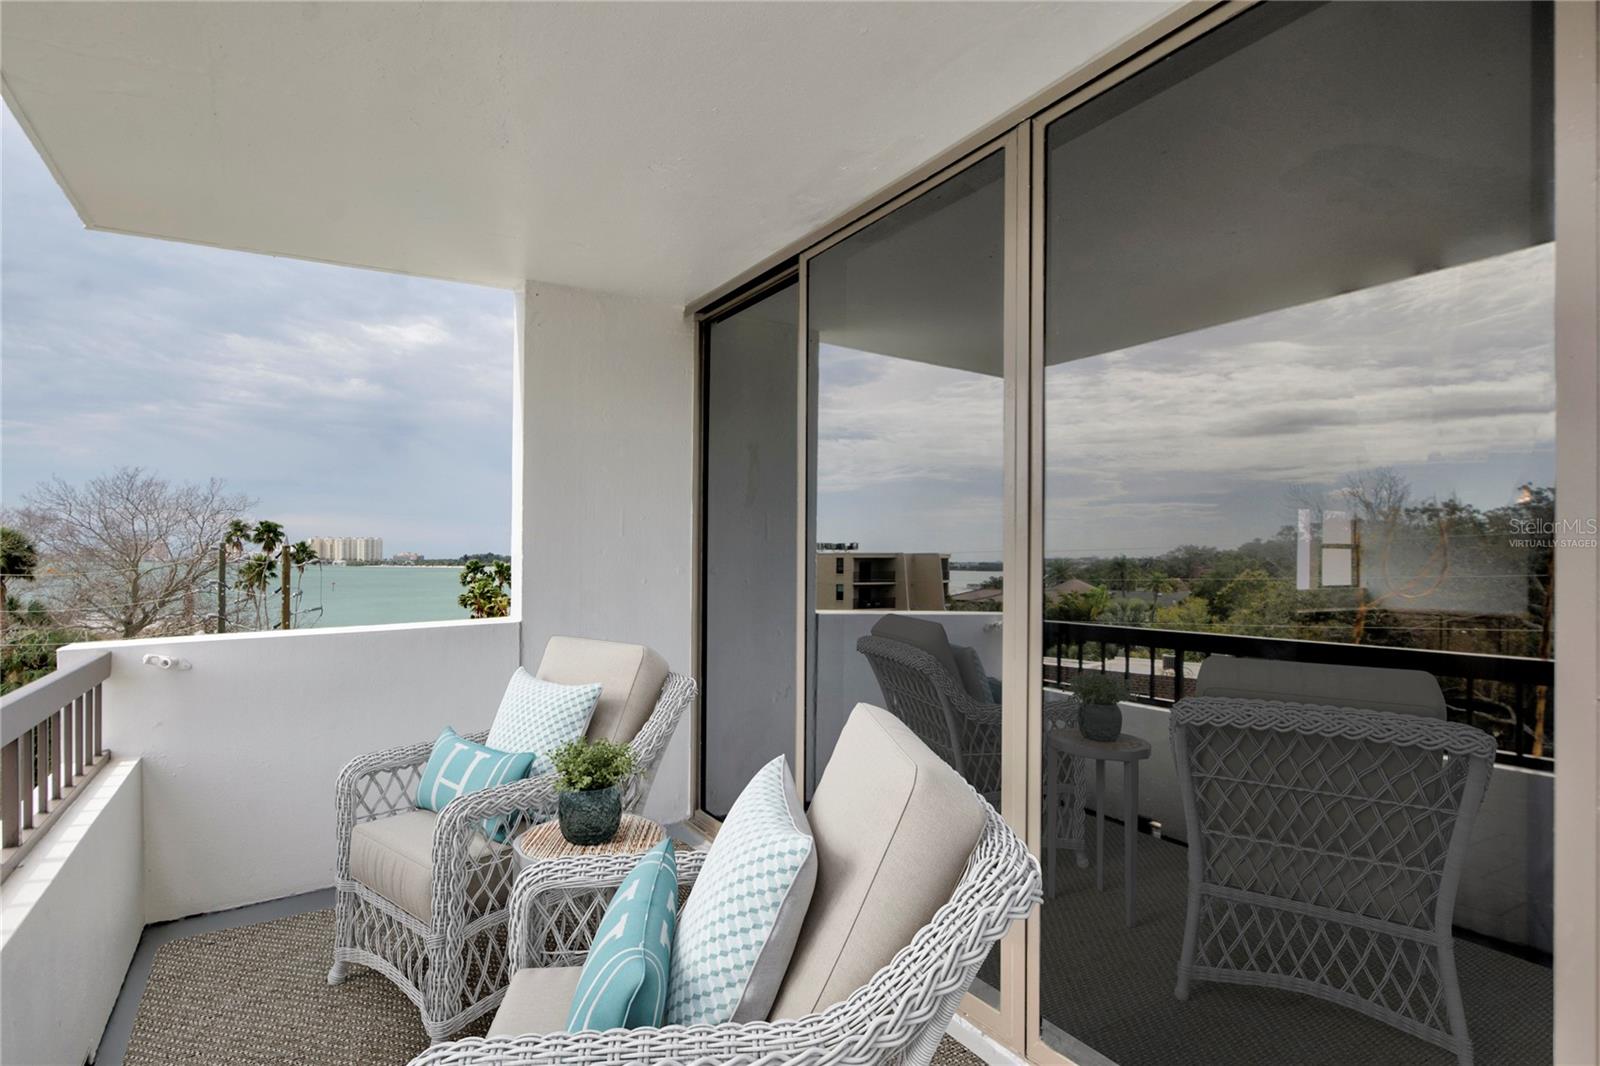 Corner unit with views of Clearwater Harbor from porch